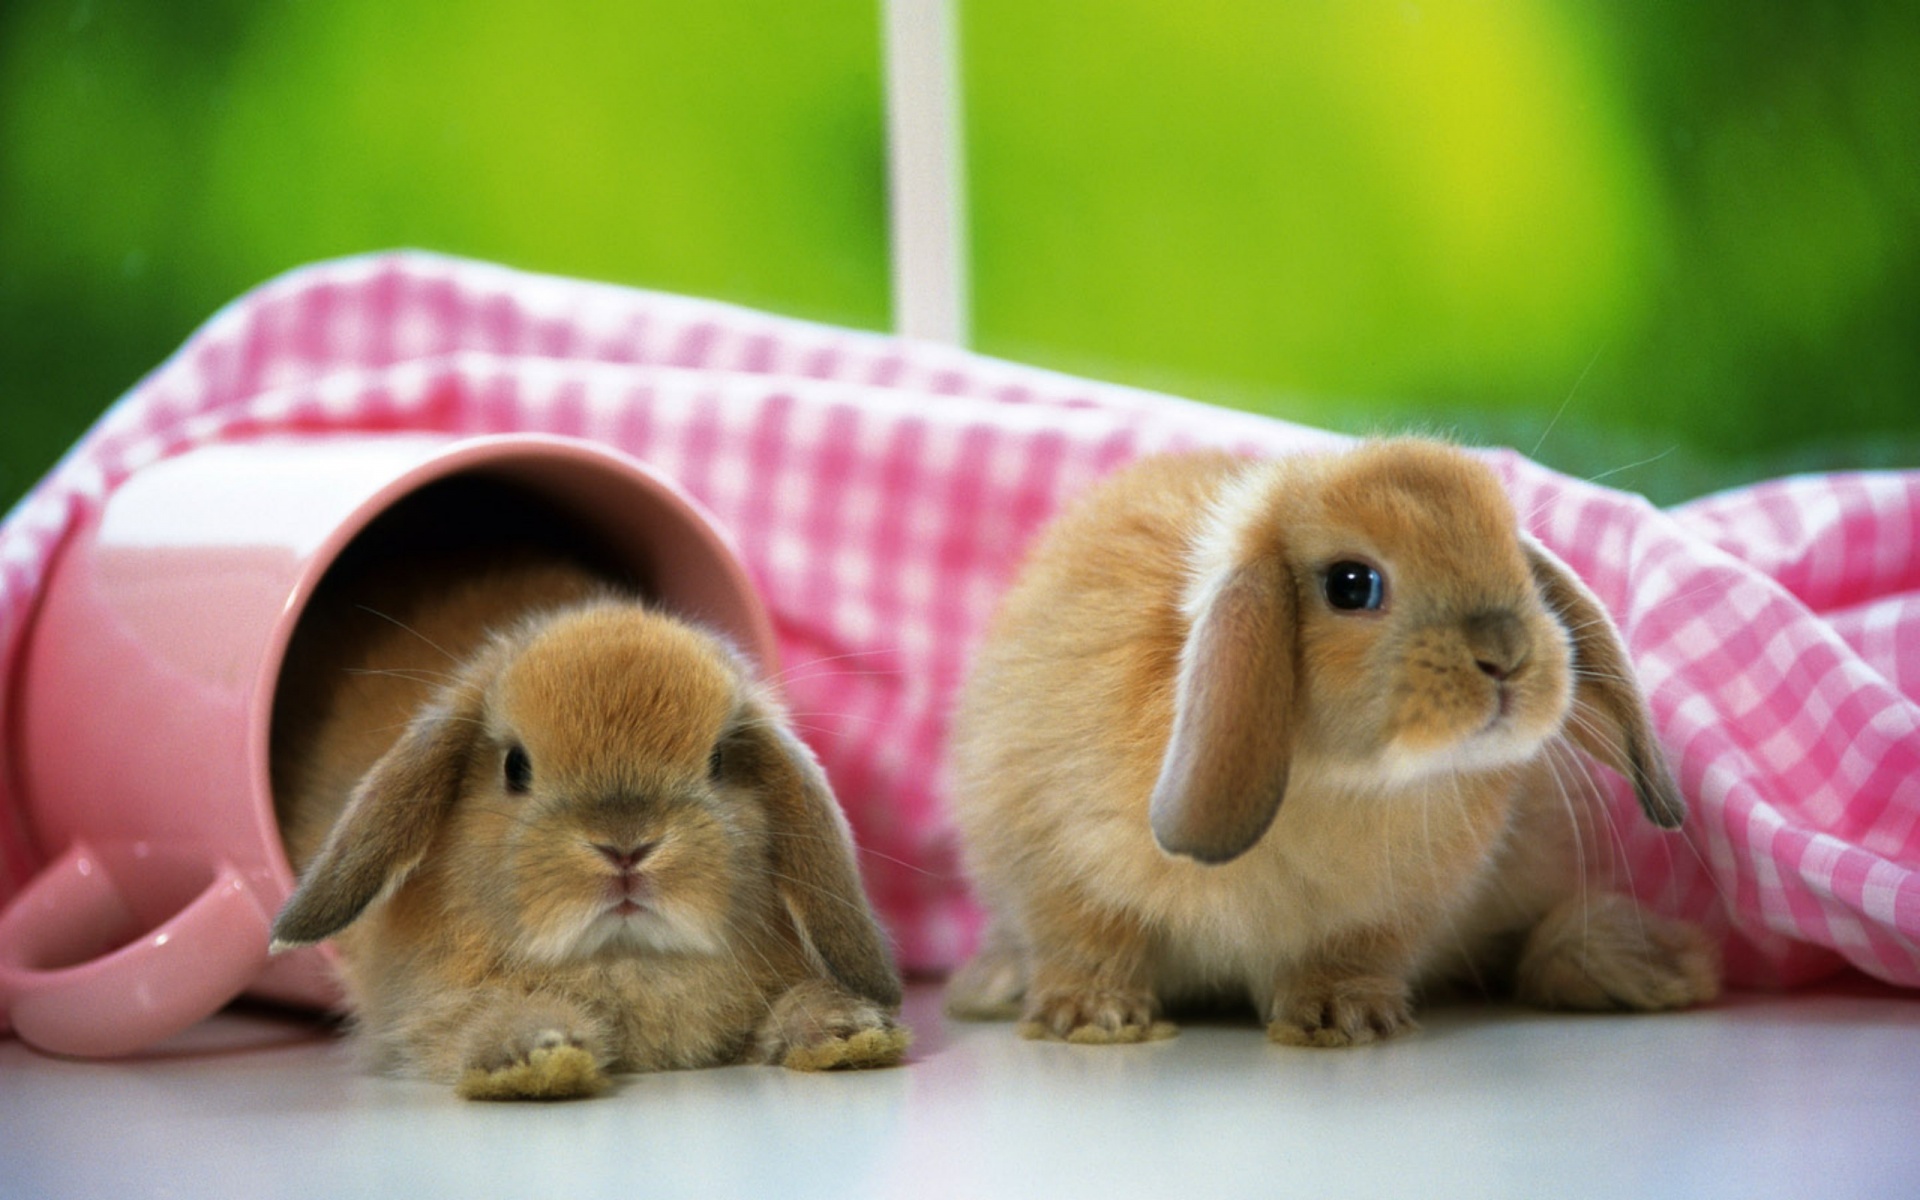 Rabbits images Bunnies HD wallpaper and background photos 40609212